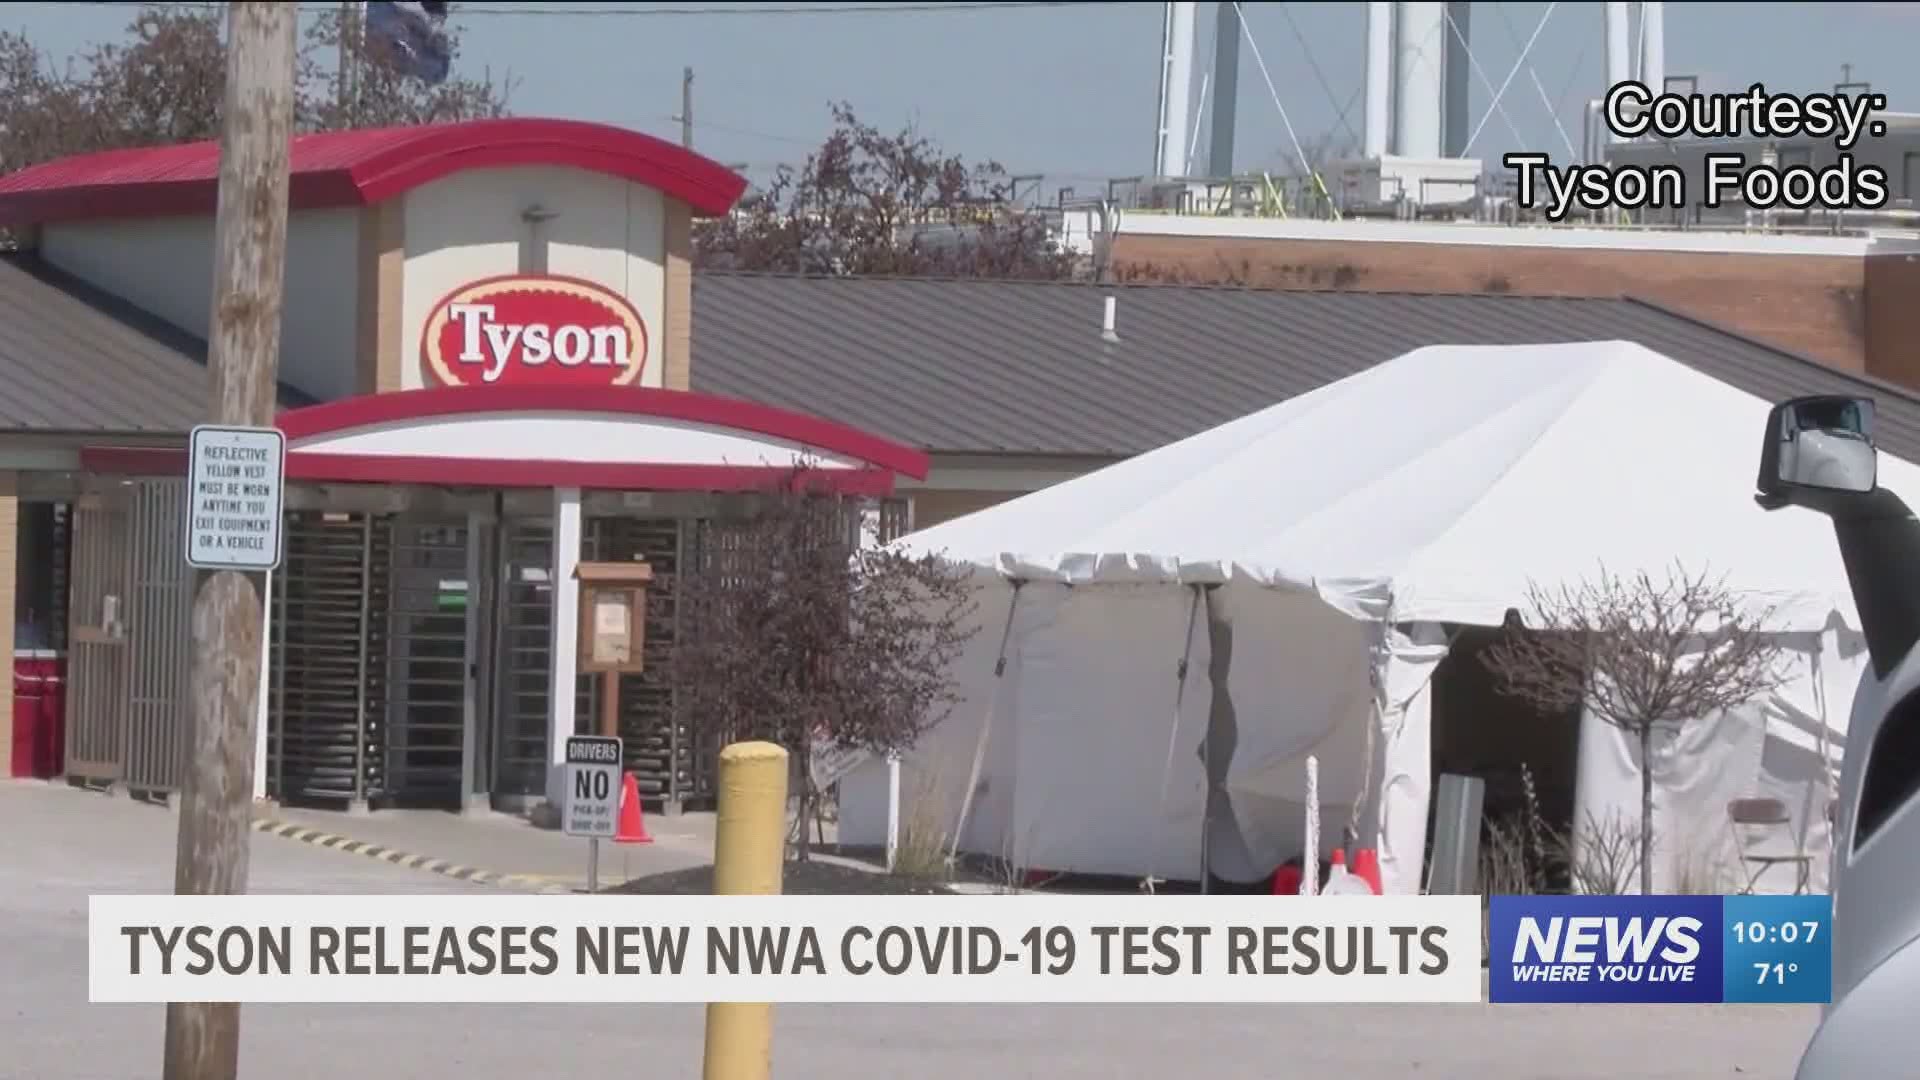 Tyson releases new NWA COVID-19 test results.